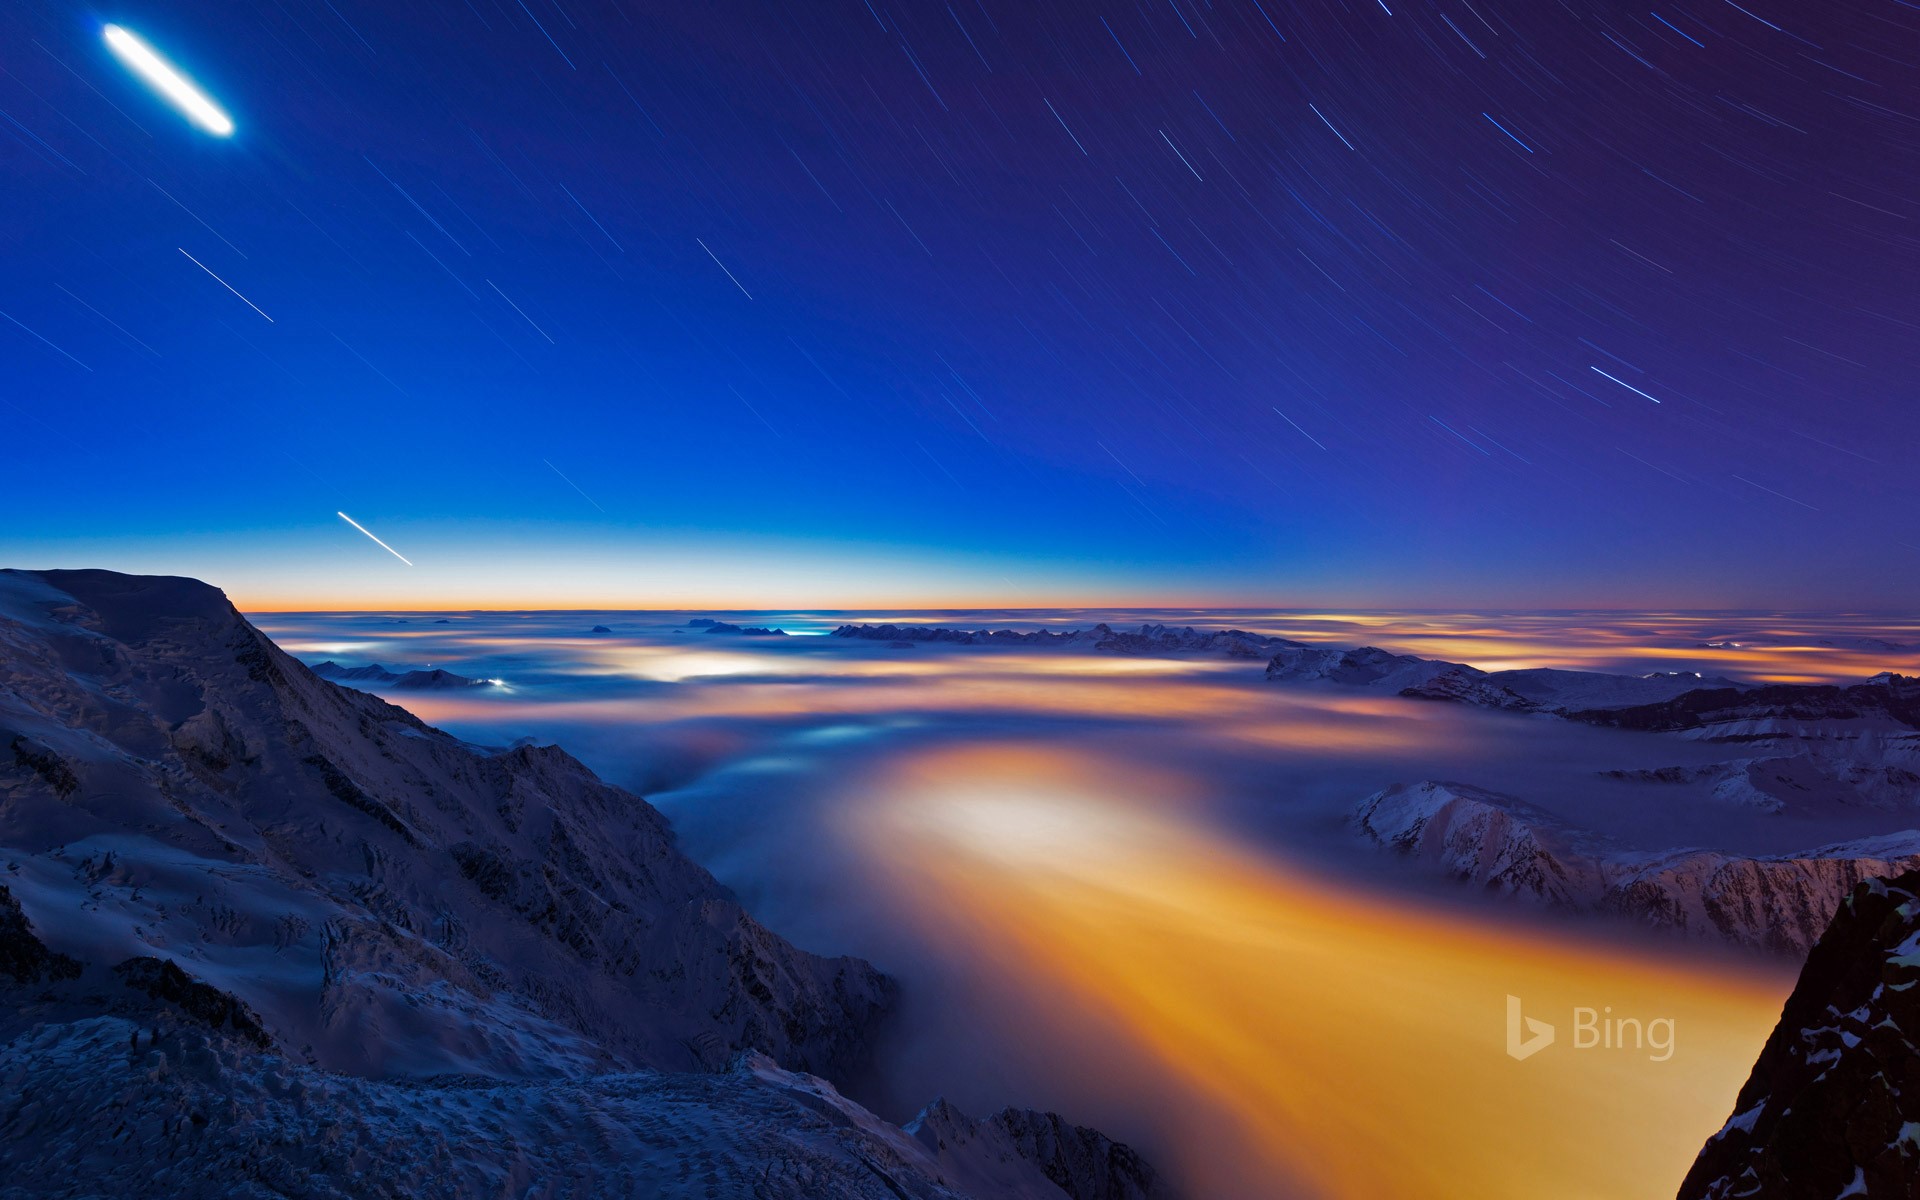 Sea of clouds over Chamonix Valley, France